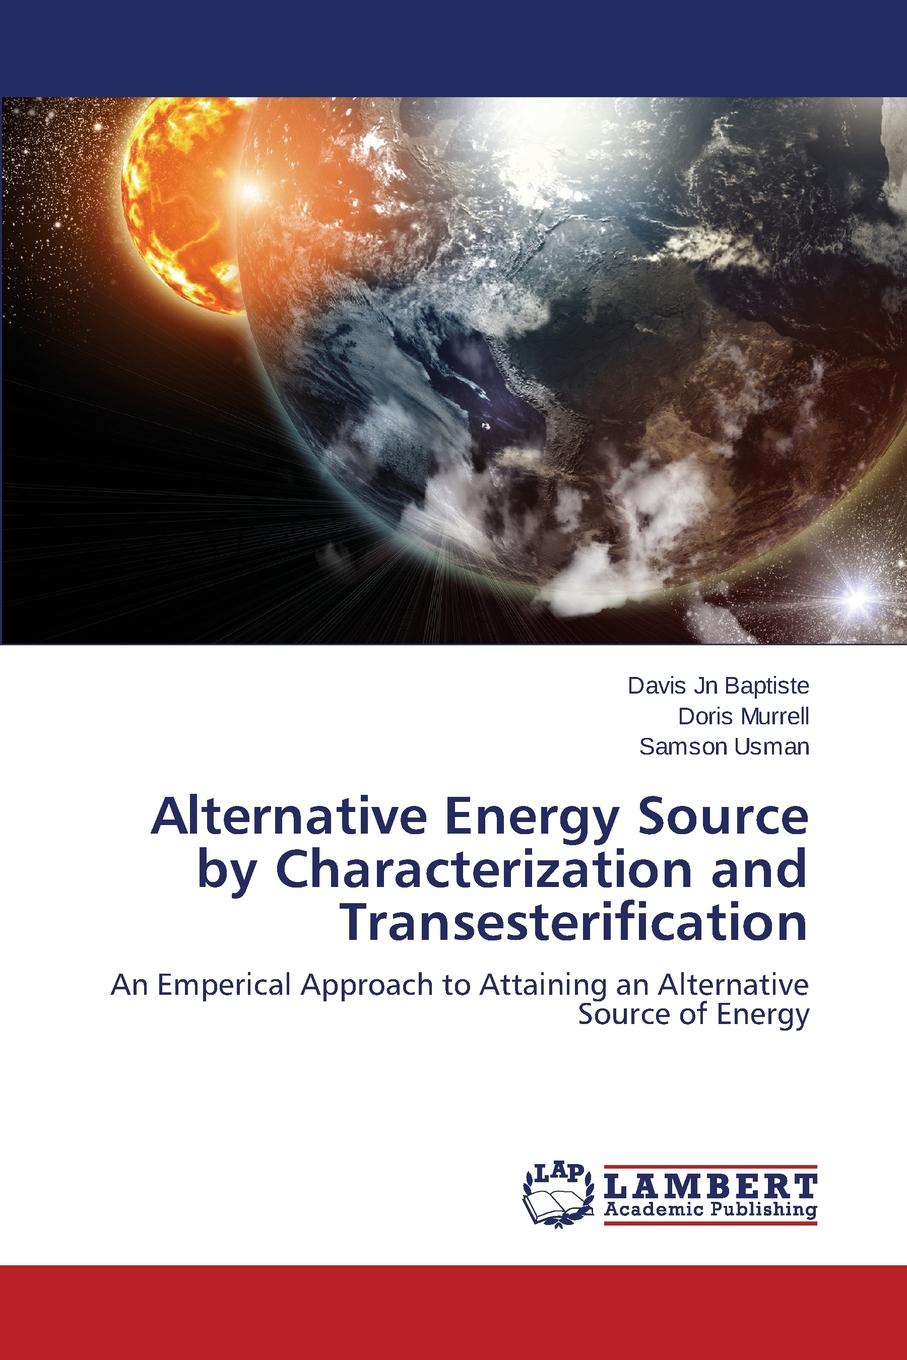 Alternative Energy Source by Characterization and Transesterification